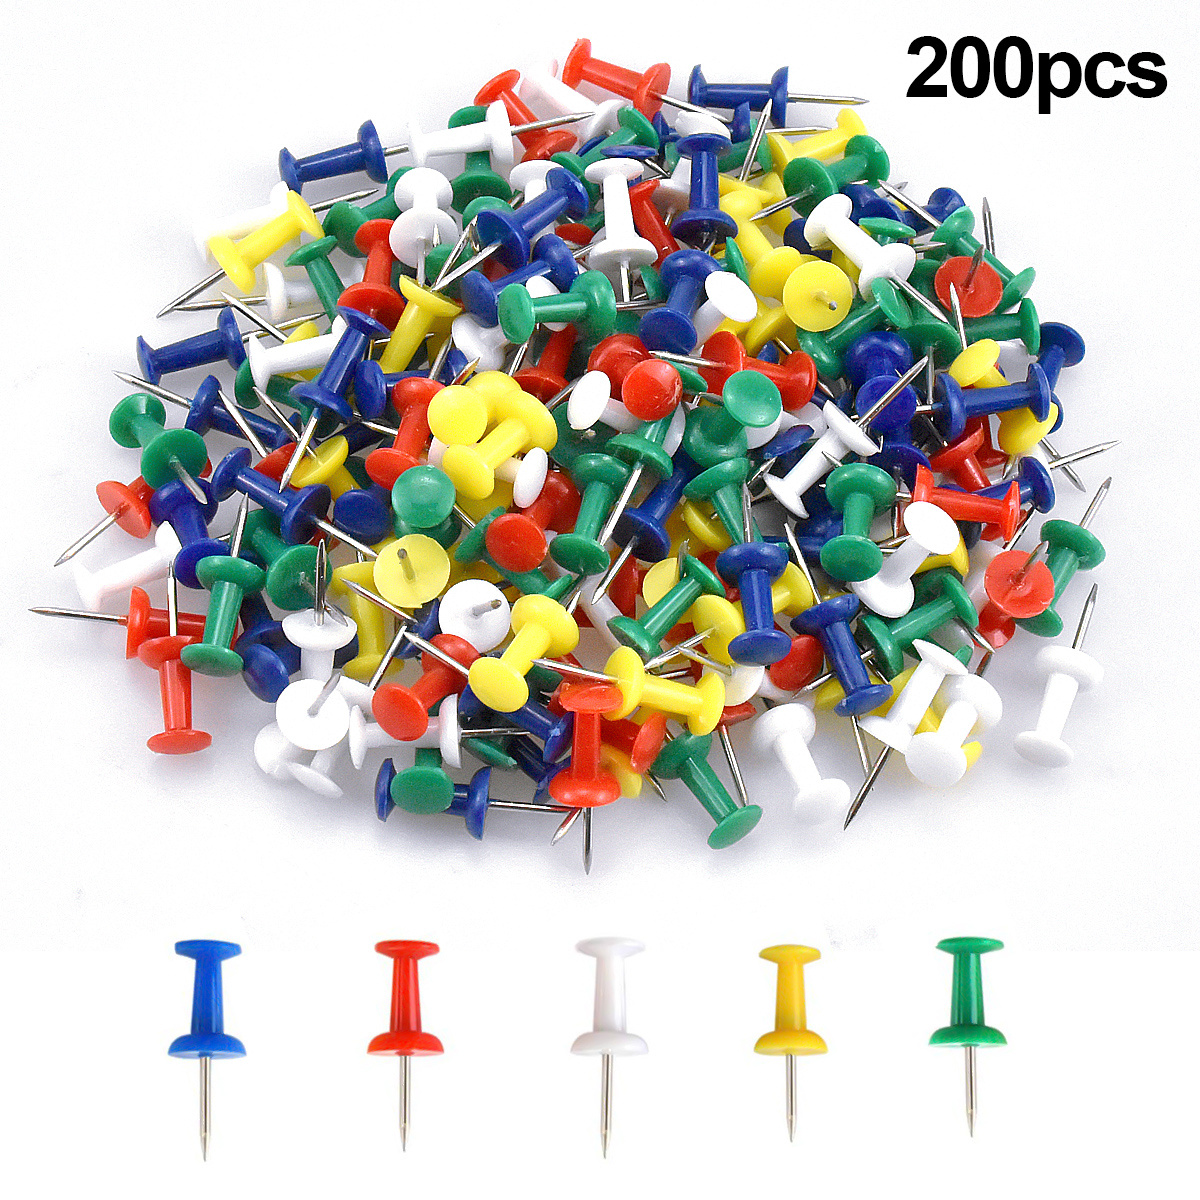 200pcs Multi Colored Push Pins with Plastic Heads & Steel Points for Map Cork Notice Board & Photos